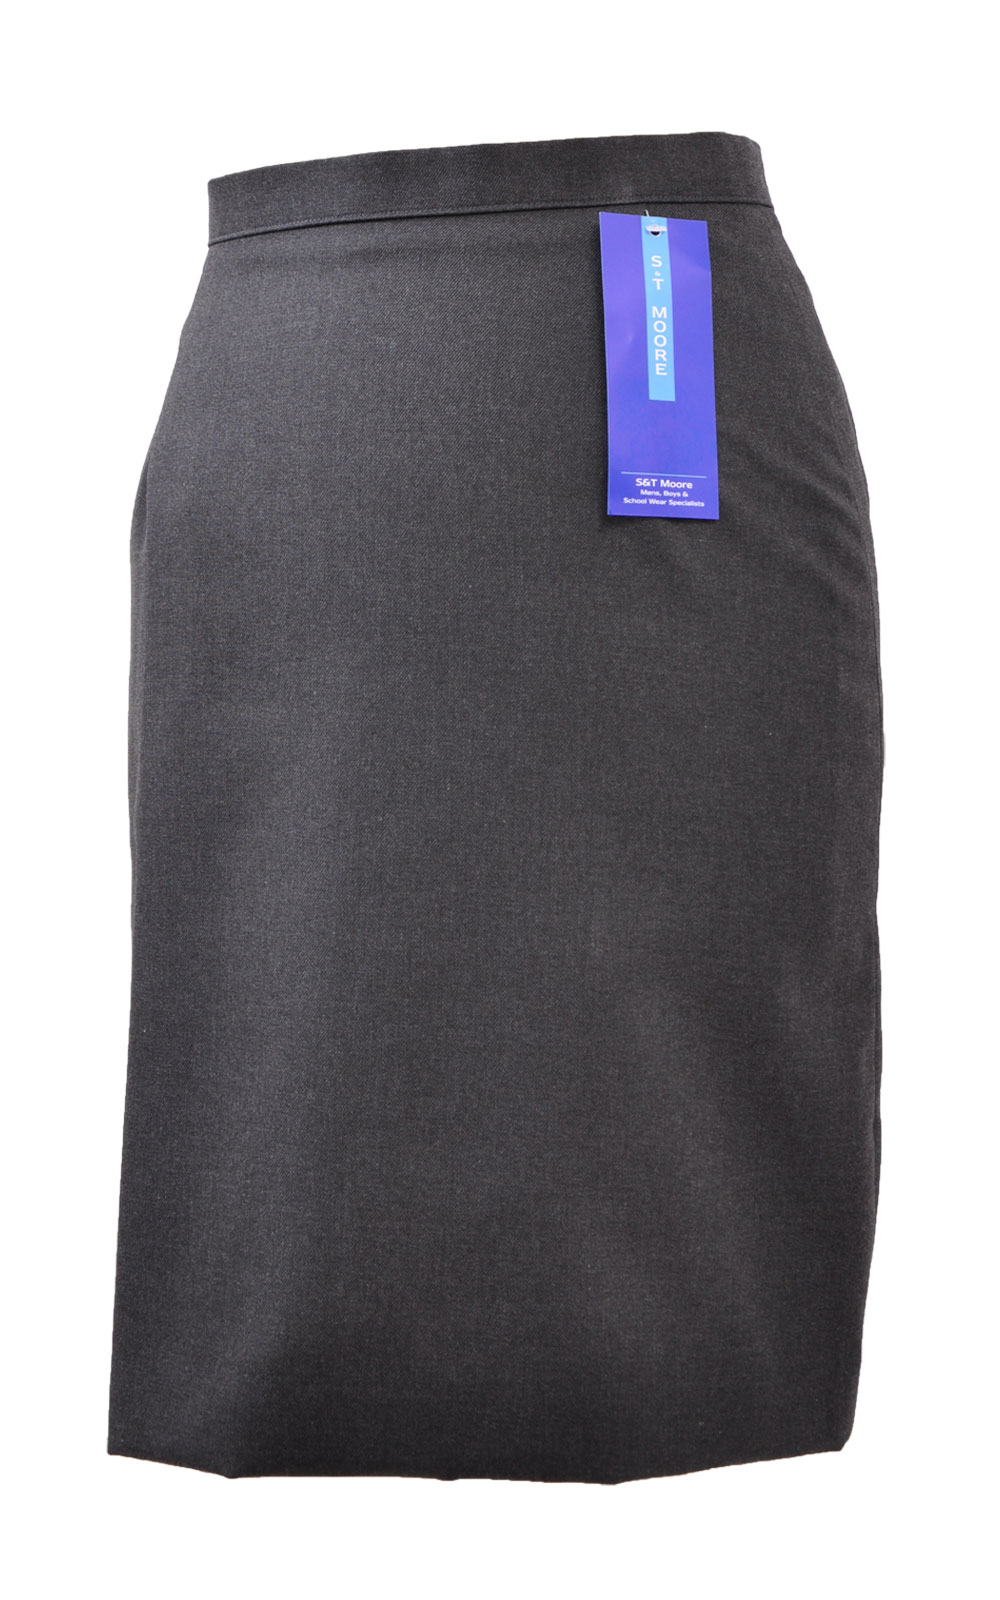 Picture of Grey A-Line Skirt 4590 - S&T Moore